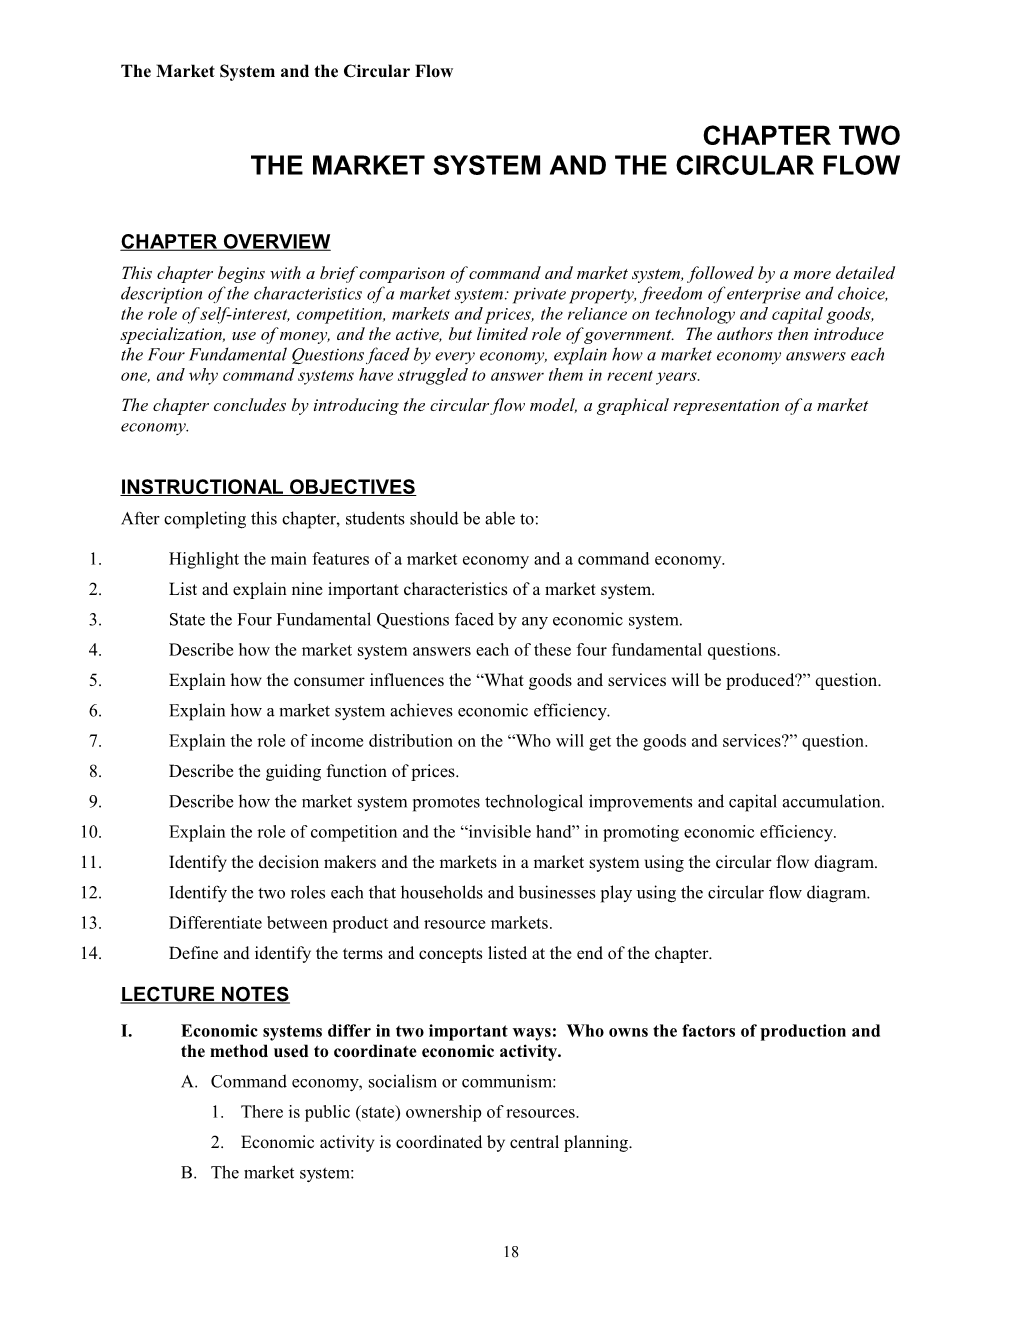 The Market System and the Circular Flow s1